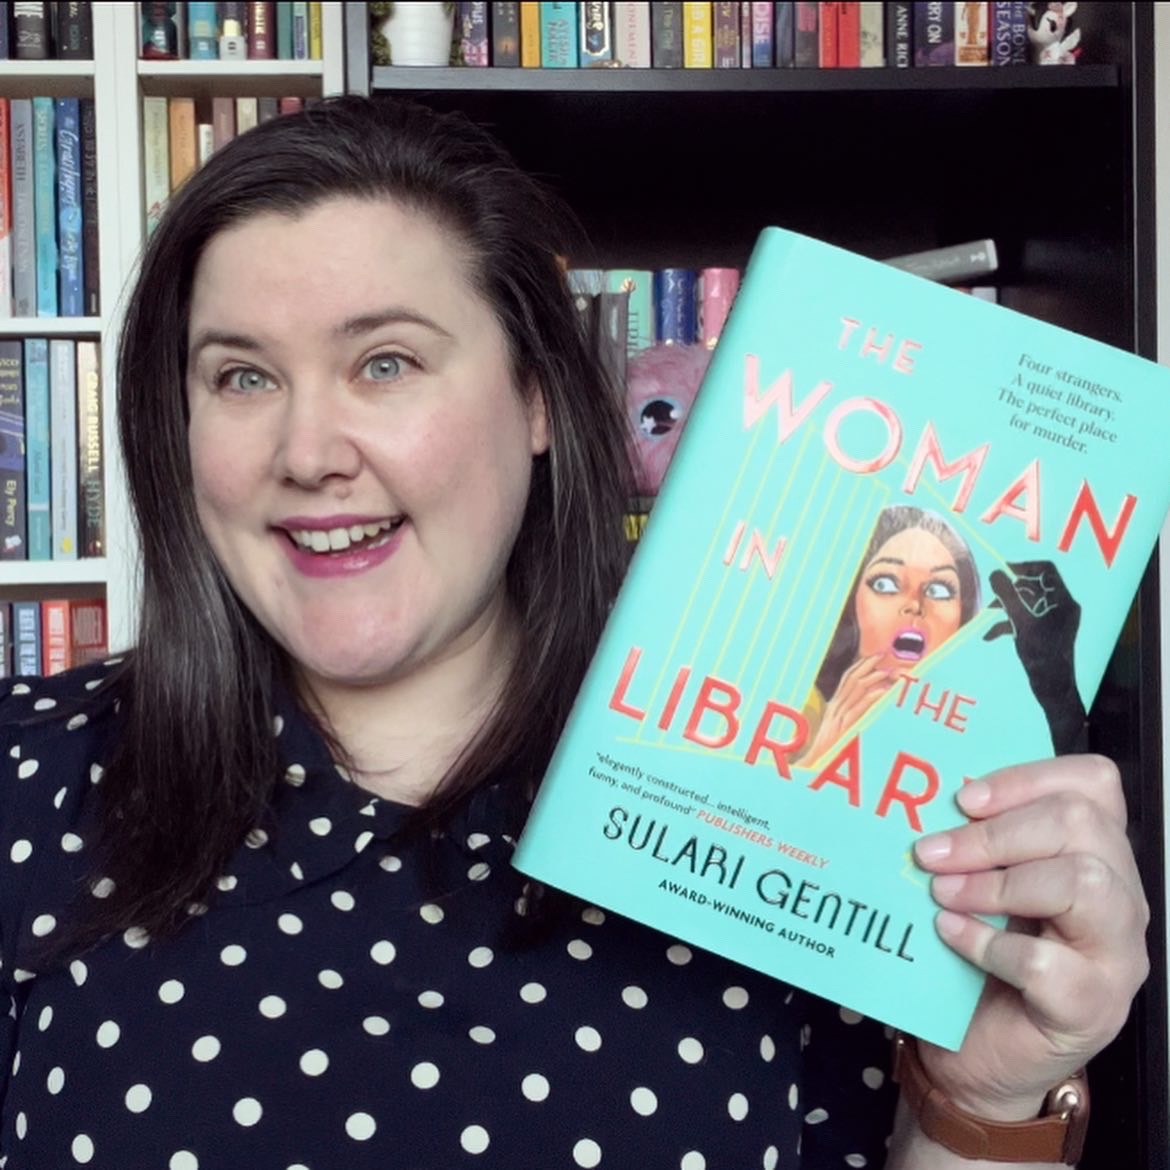 The Woman in the Library